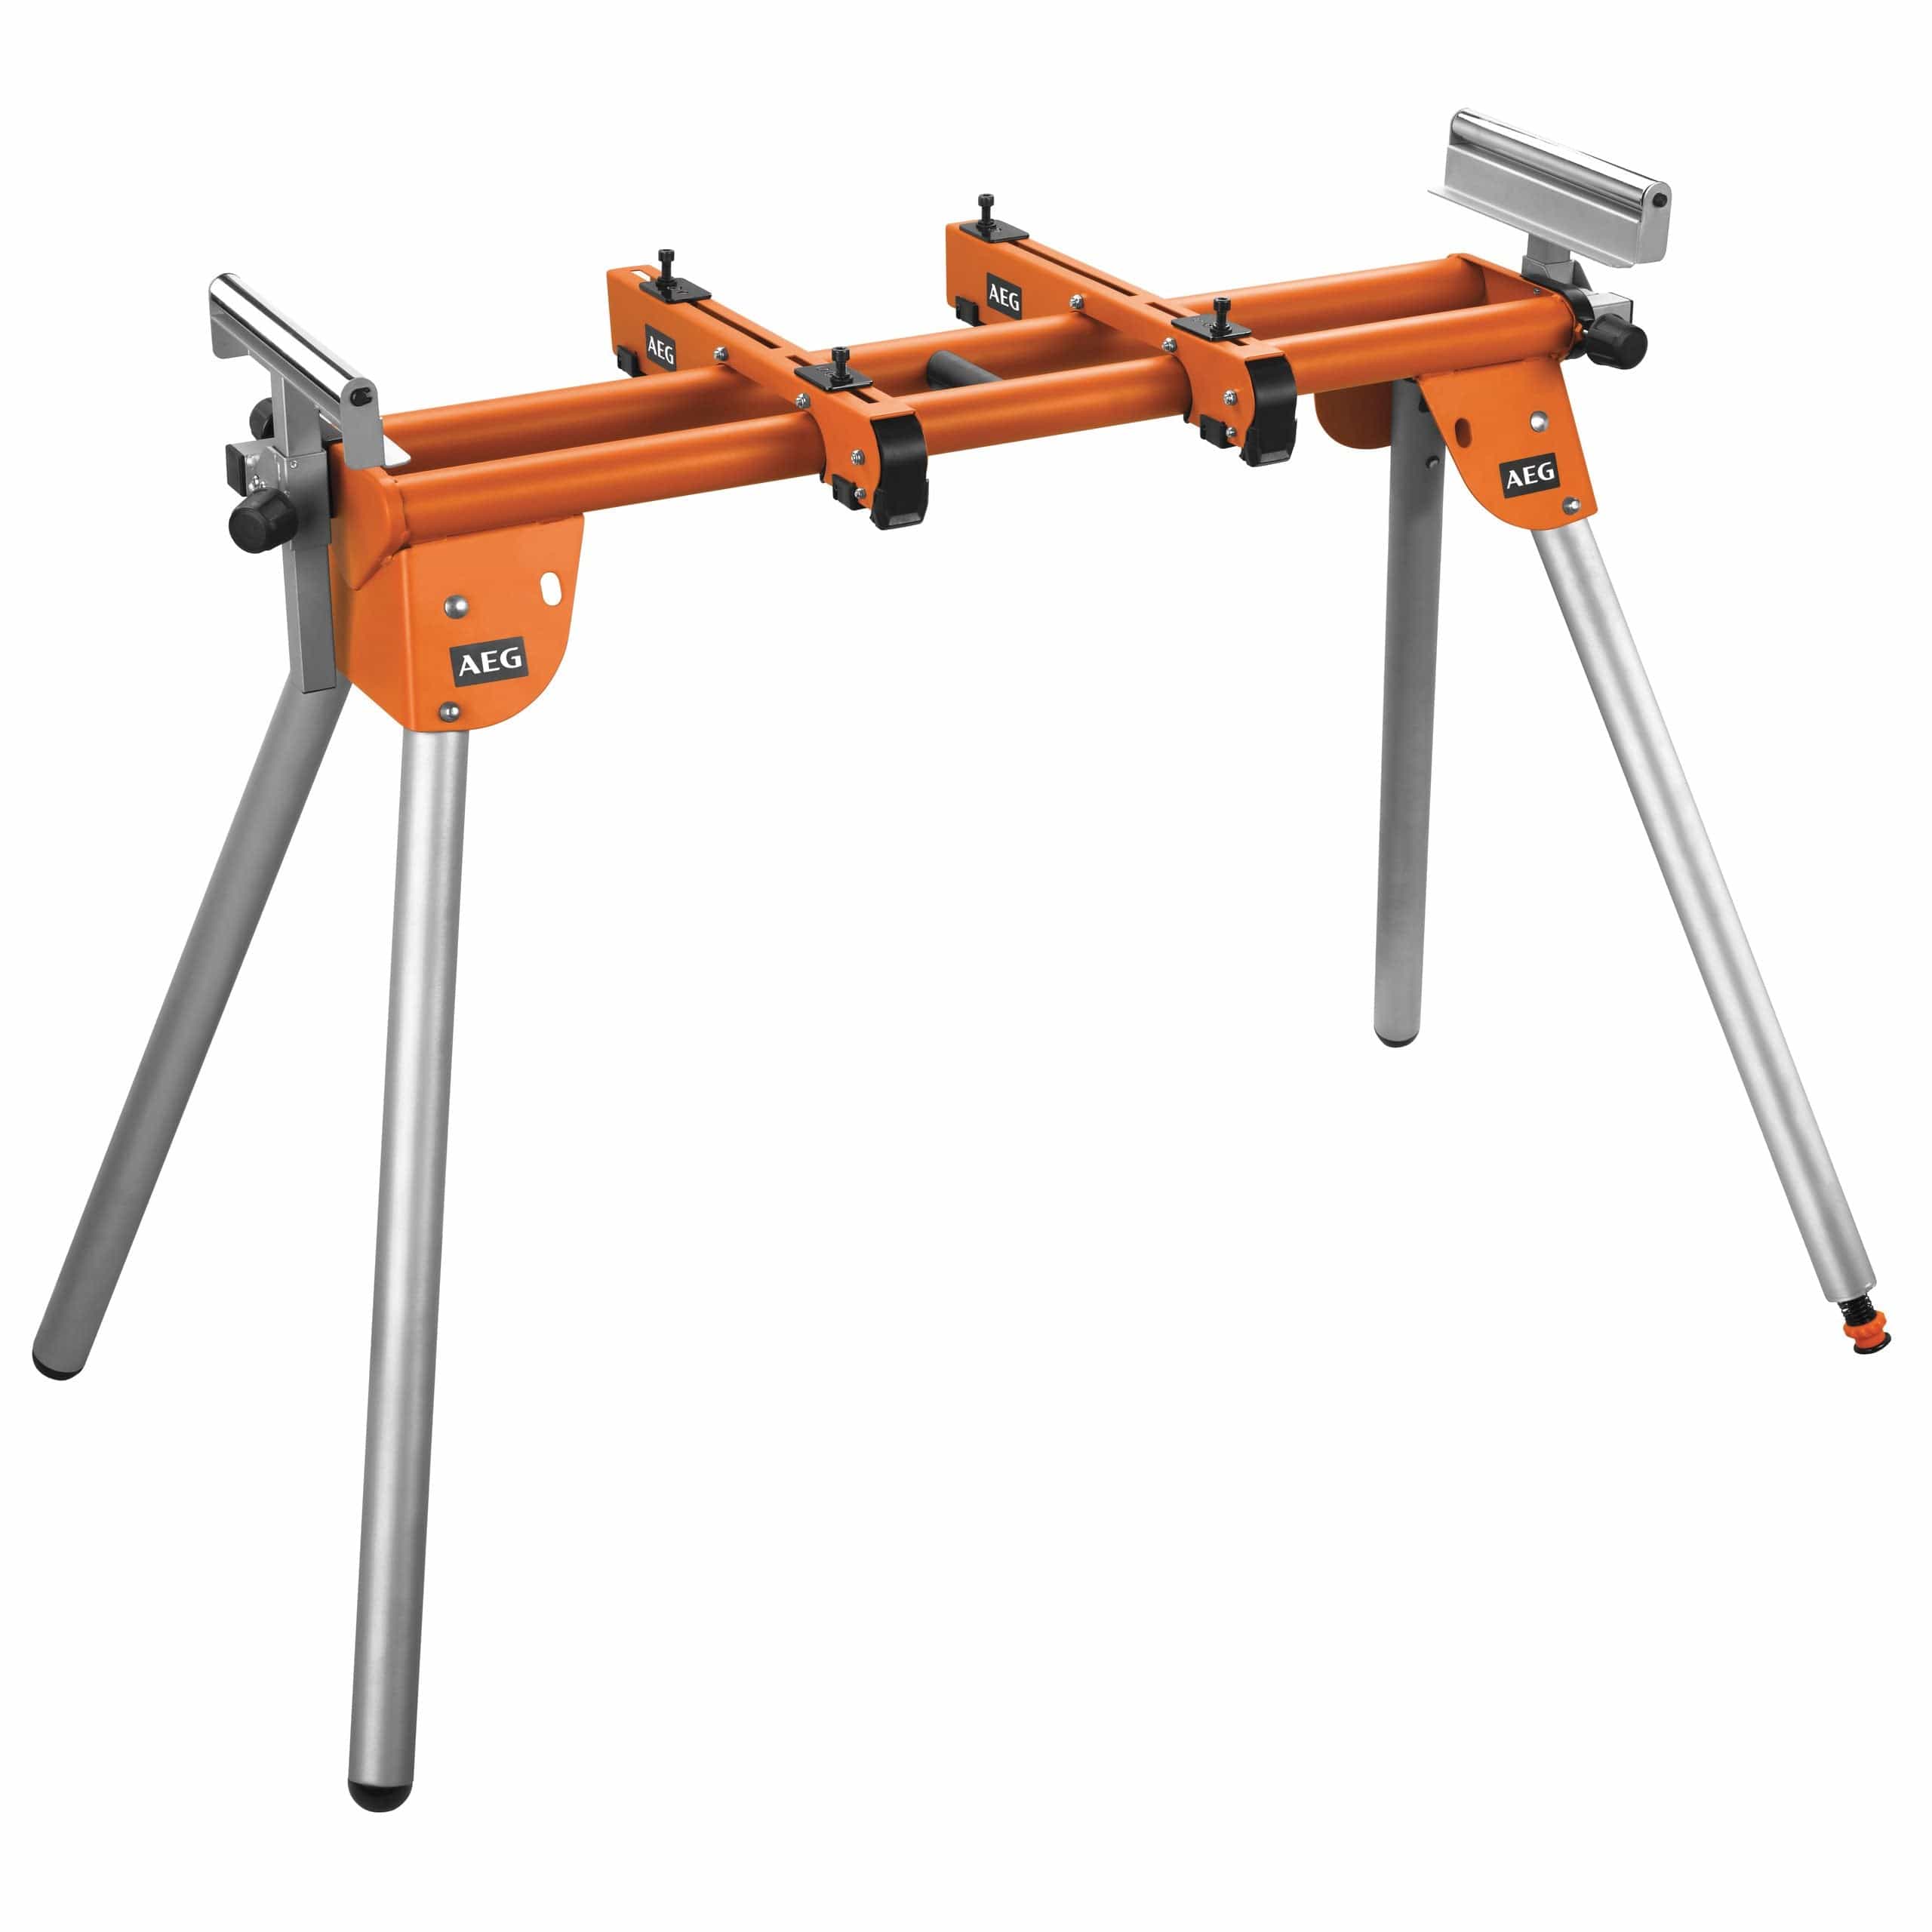 AEG 2.3M Mitre Saw Stand With Legs 180KG - PSU1000 | Supply Master Accra, Ghana Bench & Stationary Tool Buy Tools hardware Building materials